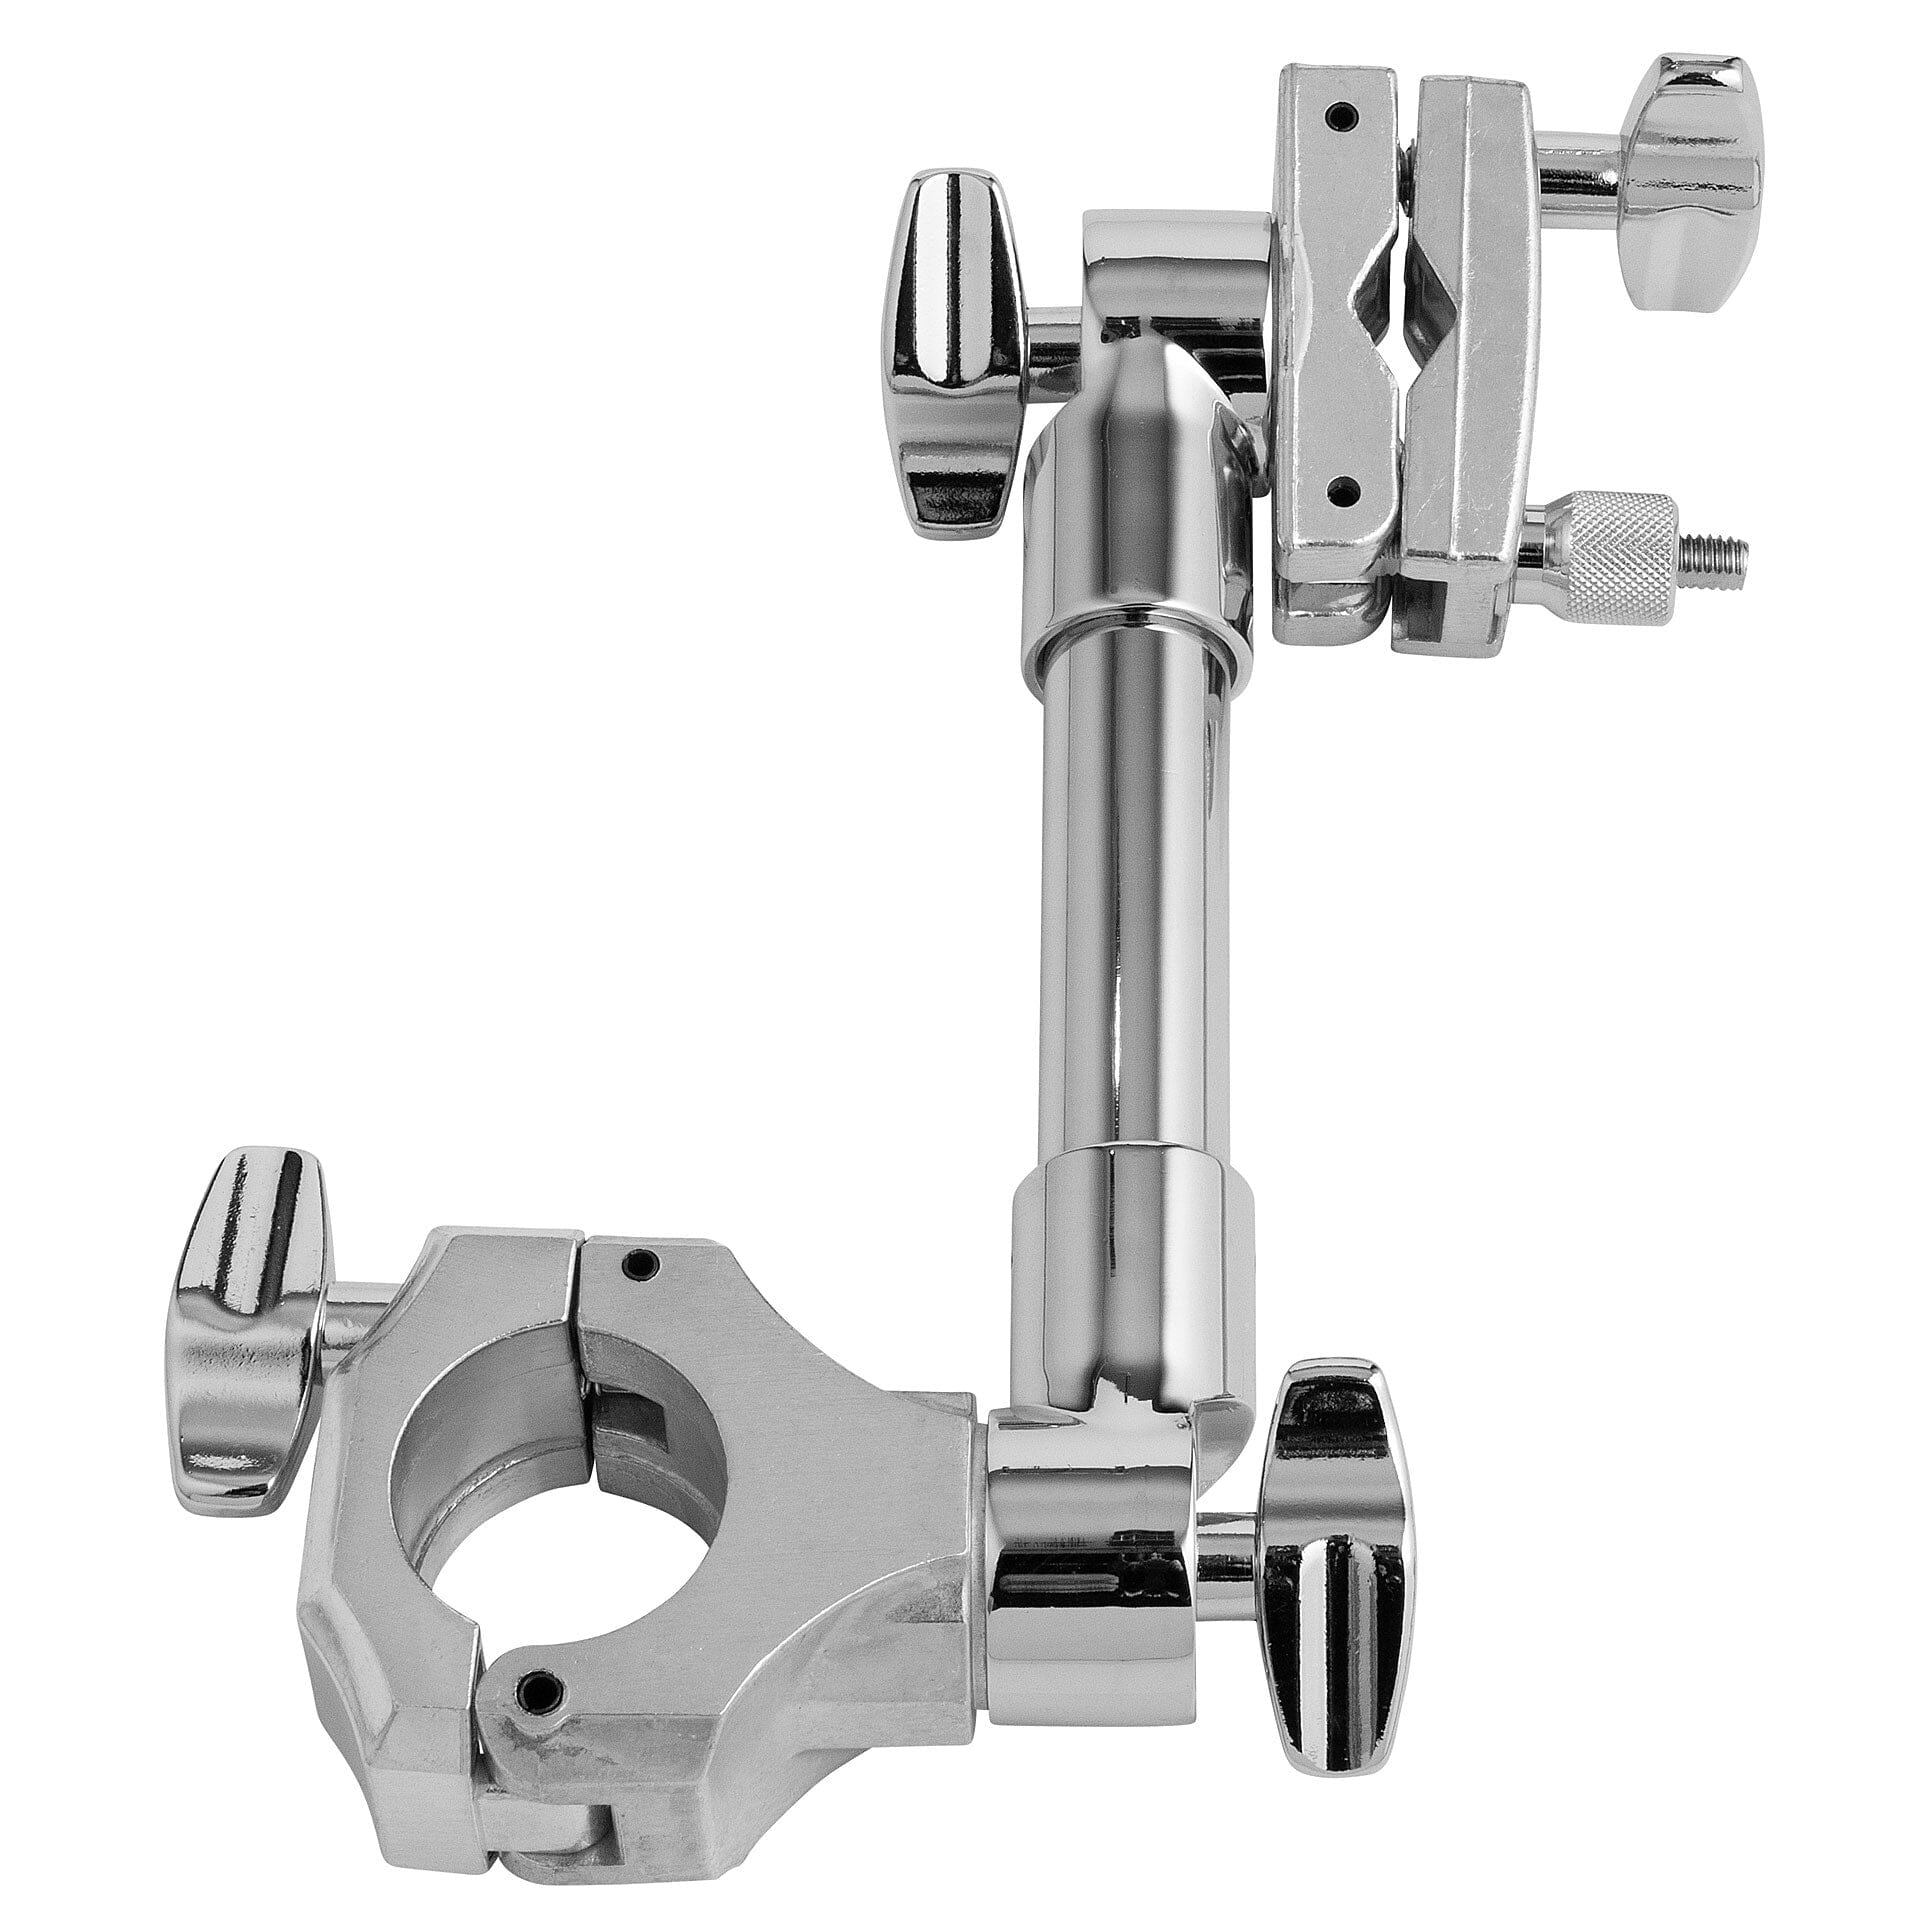 Pearl Rotating Extension Clamp, Round Pipe Clamp (PCR-50X) clamp Pearl 